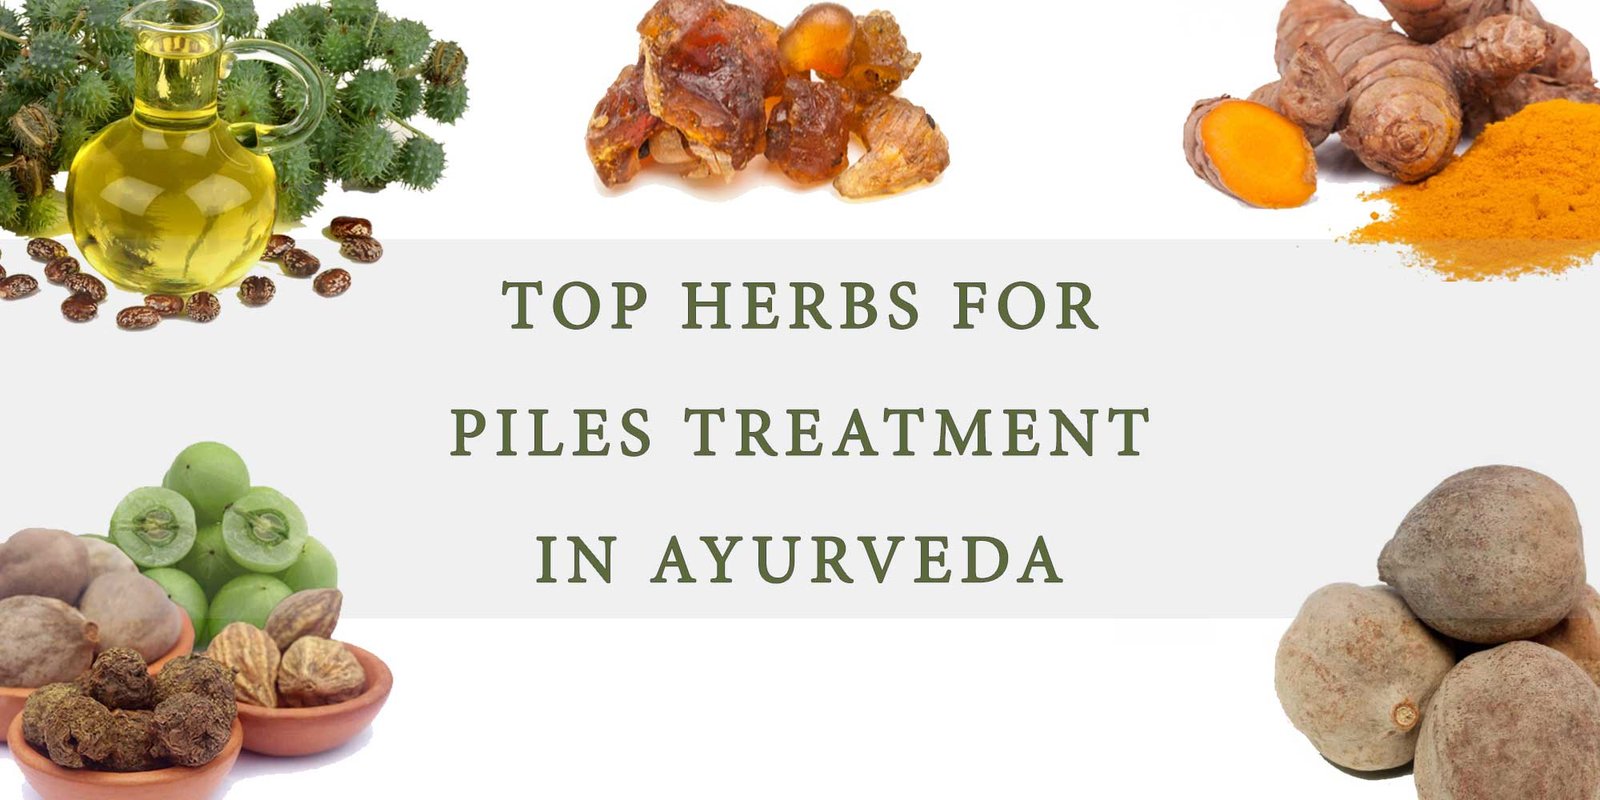 Top-Herbs-for-Piles-Treatment-in-Ayurveda